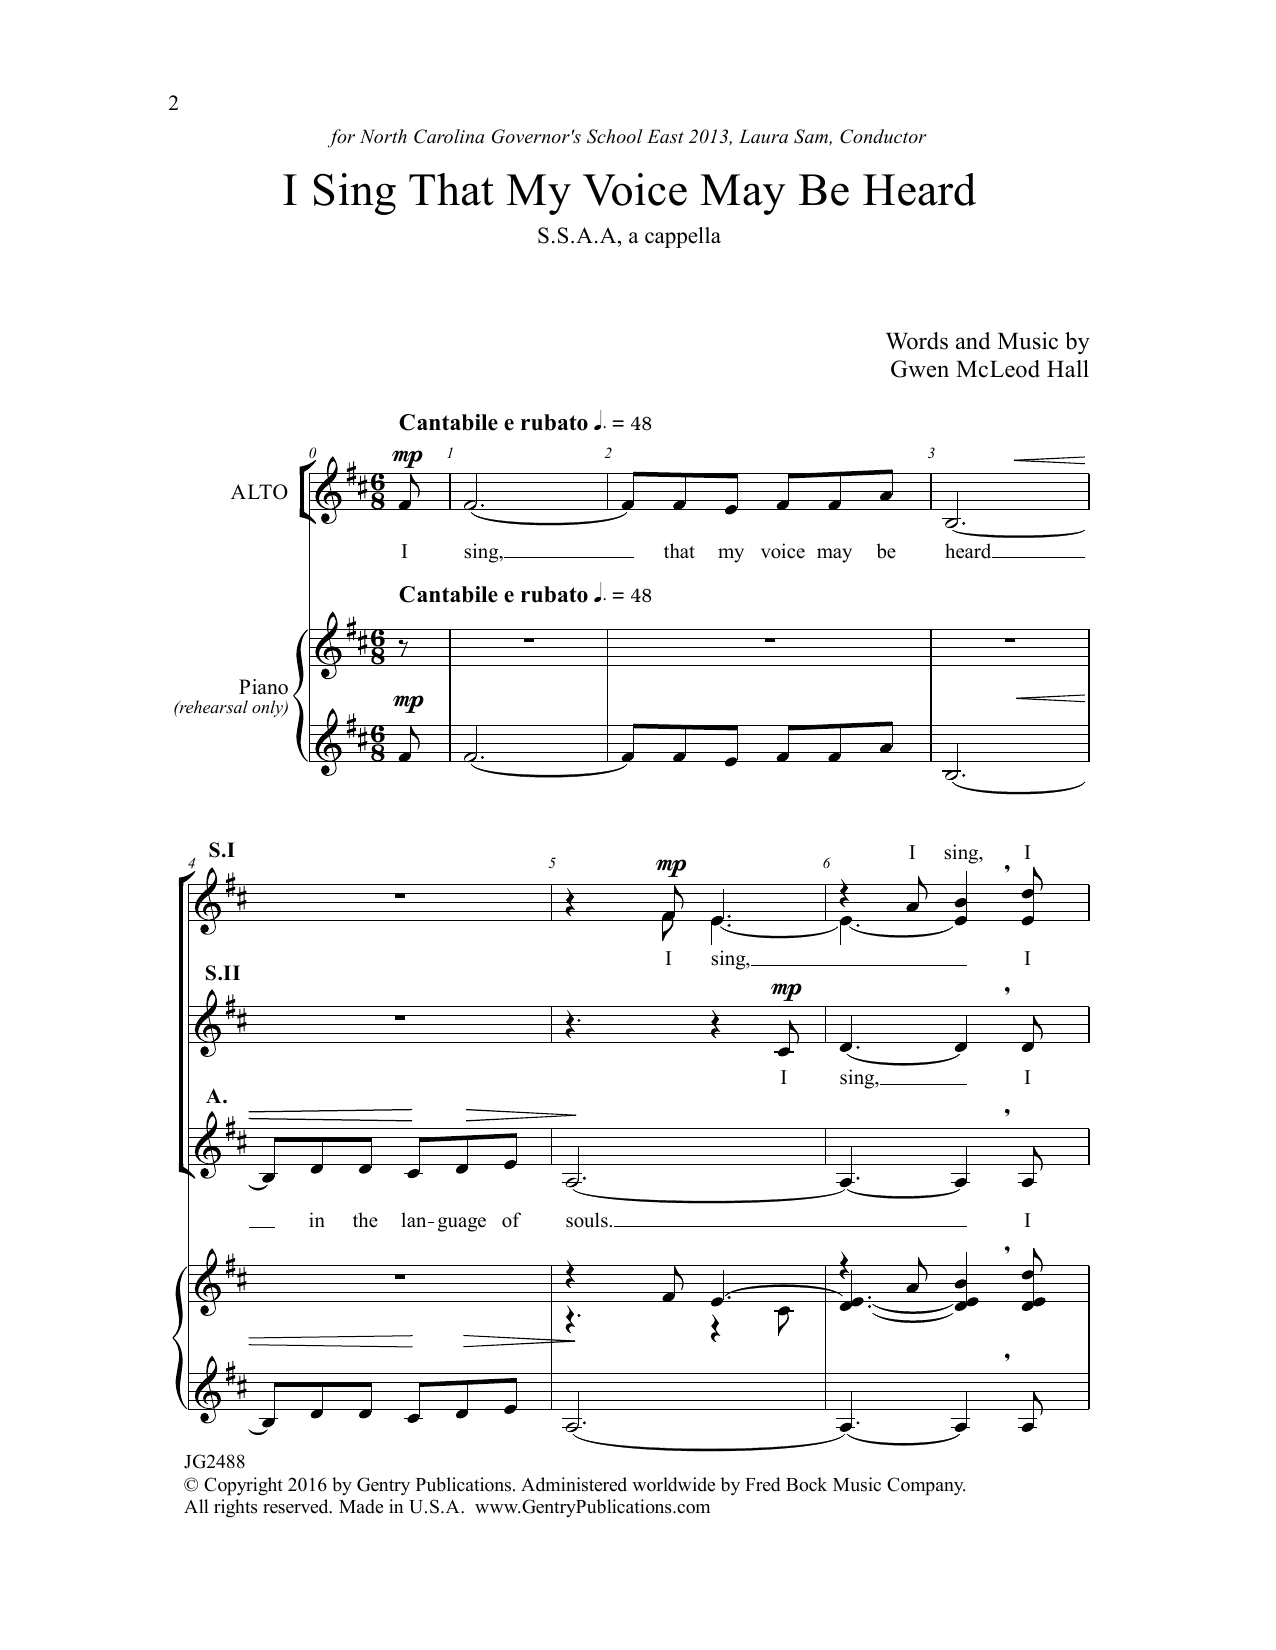 Download Gwen McLeod Hall I Sing that My Voice May be Heard Sheet Music